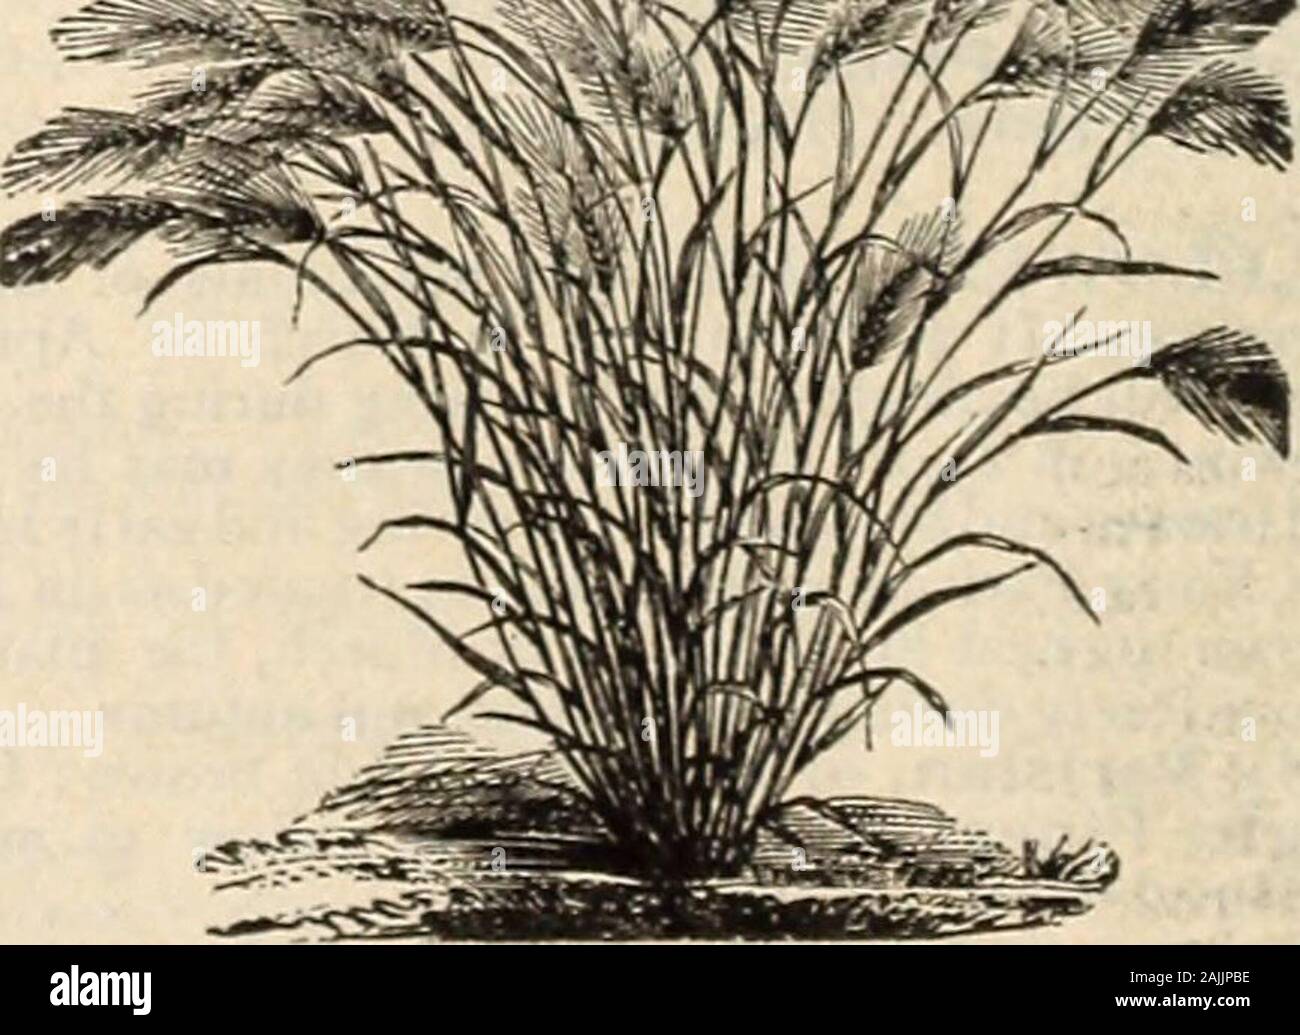 Farquhar's catalogue of seeds 1900 : plants, bulbs tools fertilizers, sundries . Annual, three feet 05 Erianthus Ravenna?. A hardy perennial Grass re-sembling the Pampas, with beautiful foliage and finesilvery plumes ; excellent for lawn specimens. Bloomsthe first year from seed if sown early. Height eight feet .10 Eragrostis Elegans. (Love Grass.) Elegant forbouquets and for use with Everlasting flowers; annual one foot • 05 Eulalia Japonica Foliis Vittatis. This is one ofour finest hardy perennial Grasses, with long gracefulleaves, dark green and white striped. It is one of themost beautiful Stock Photo